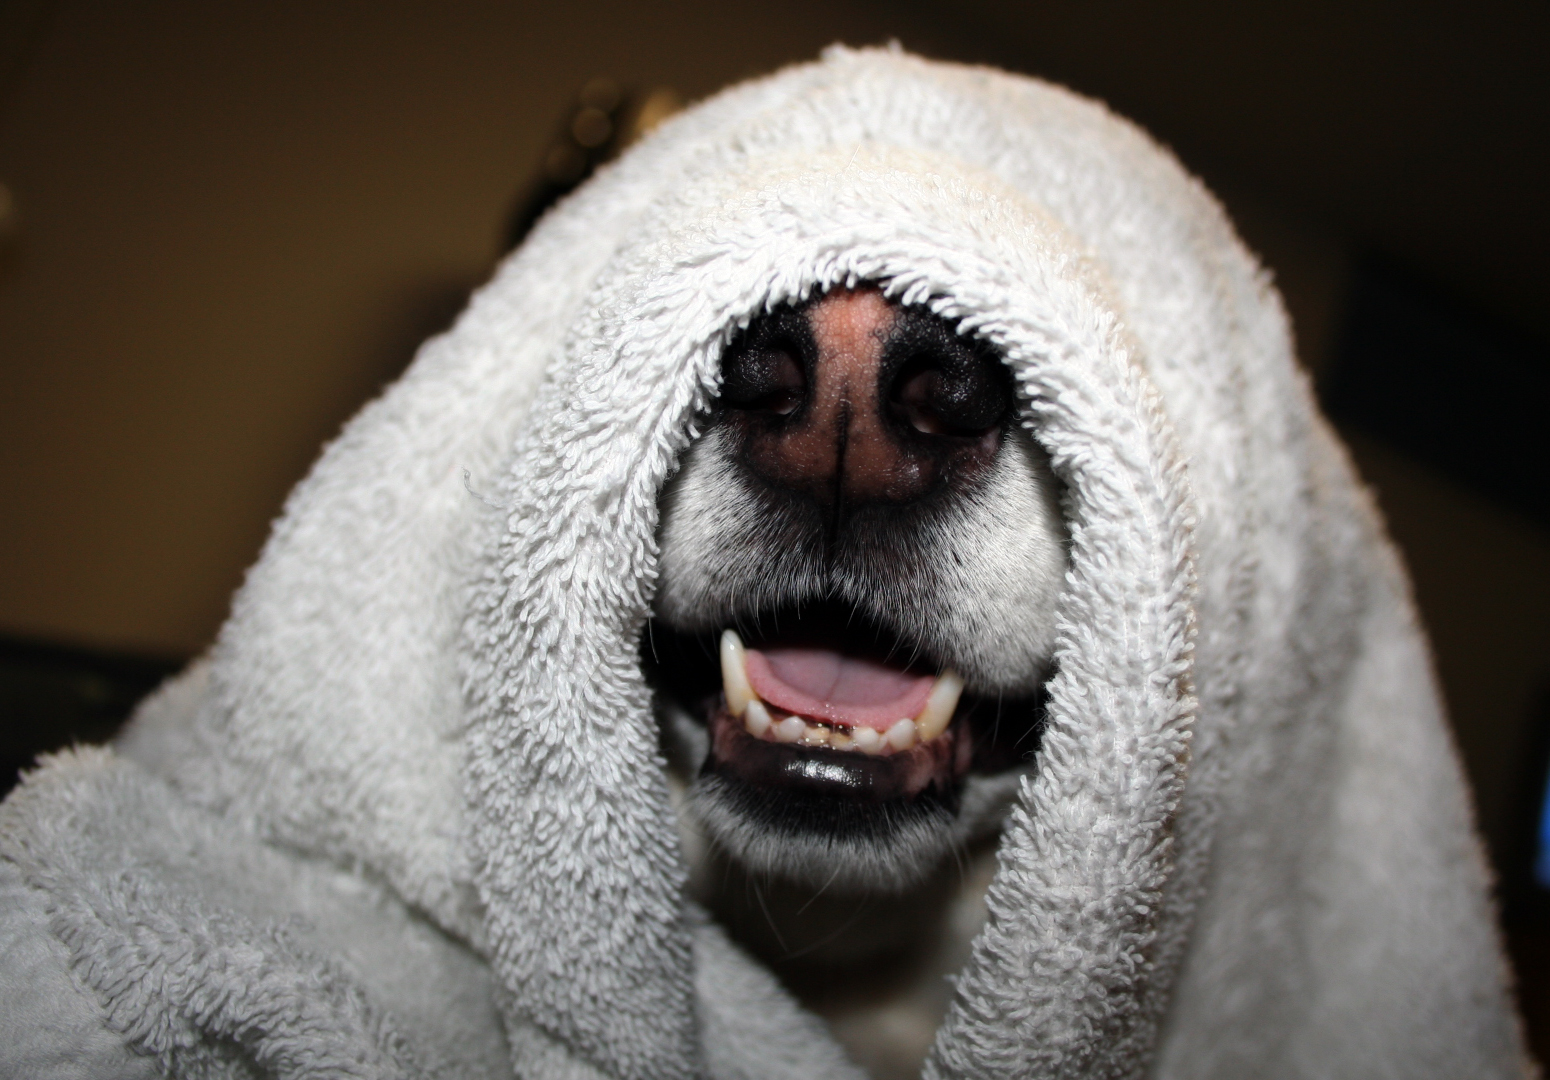 a close up of a dog wrapped in white towels